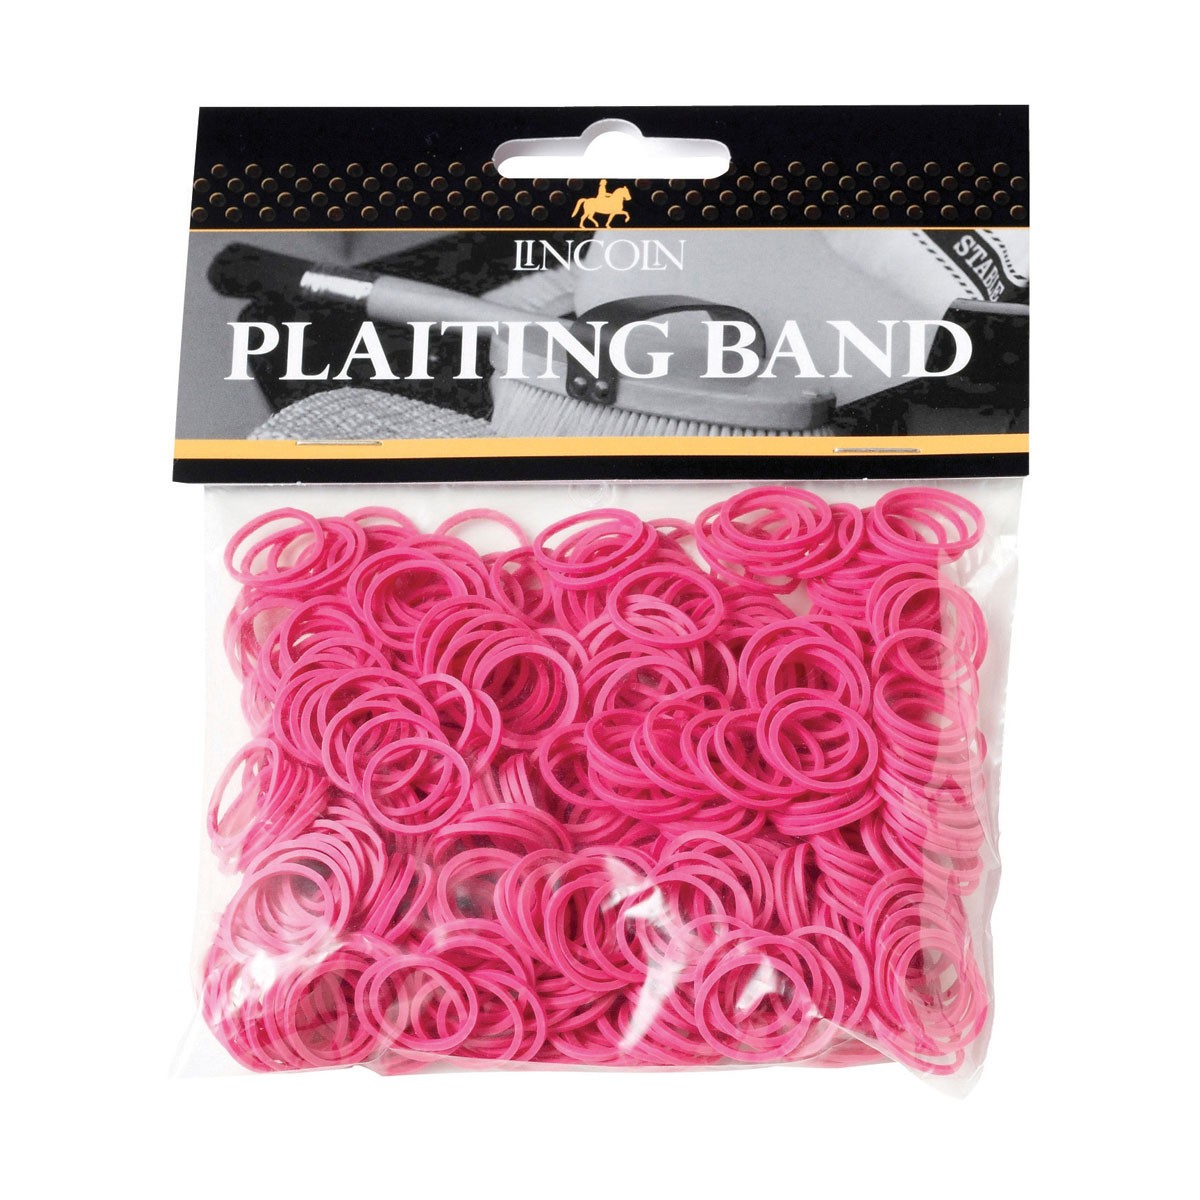 Lincoln Plaiting Bands x 20Bulk Deal Approx 500 bands 